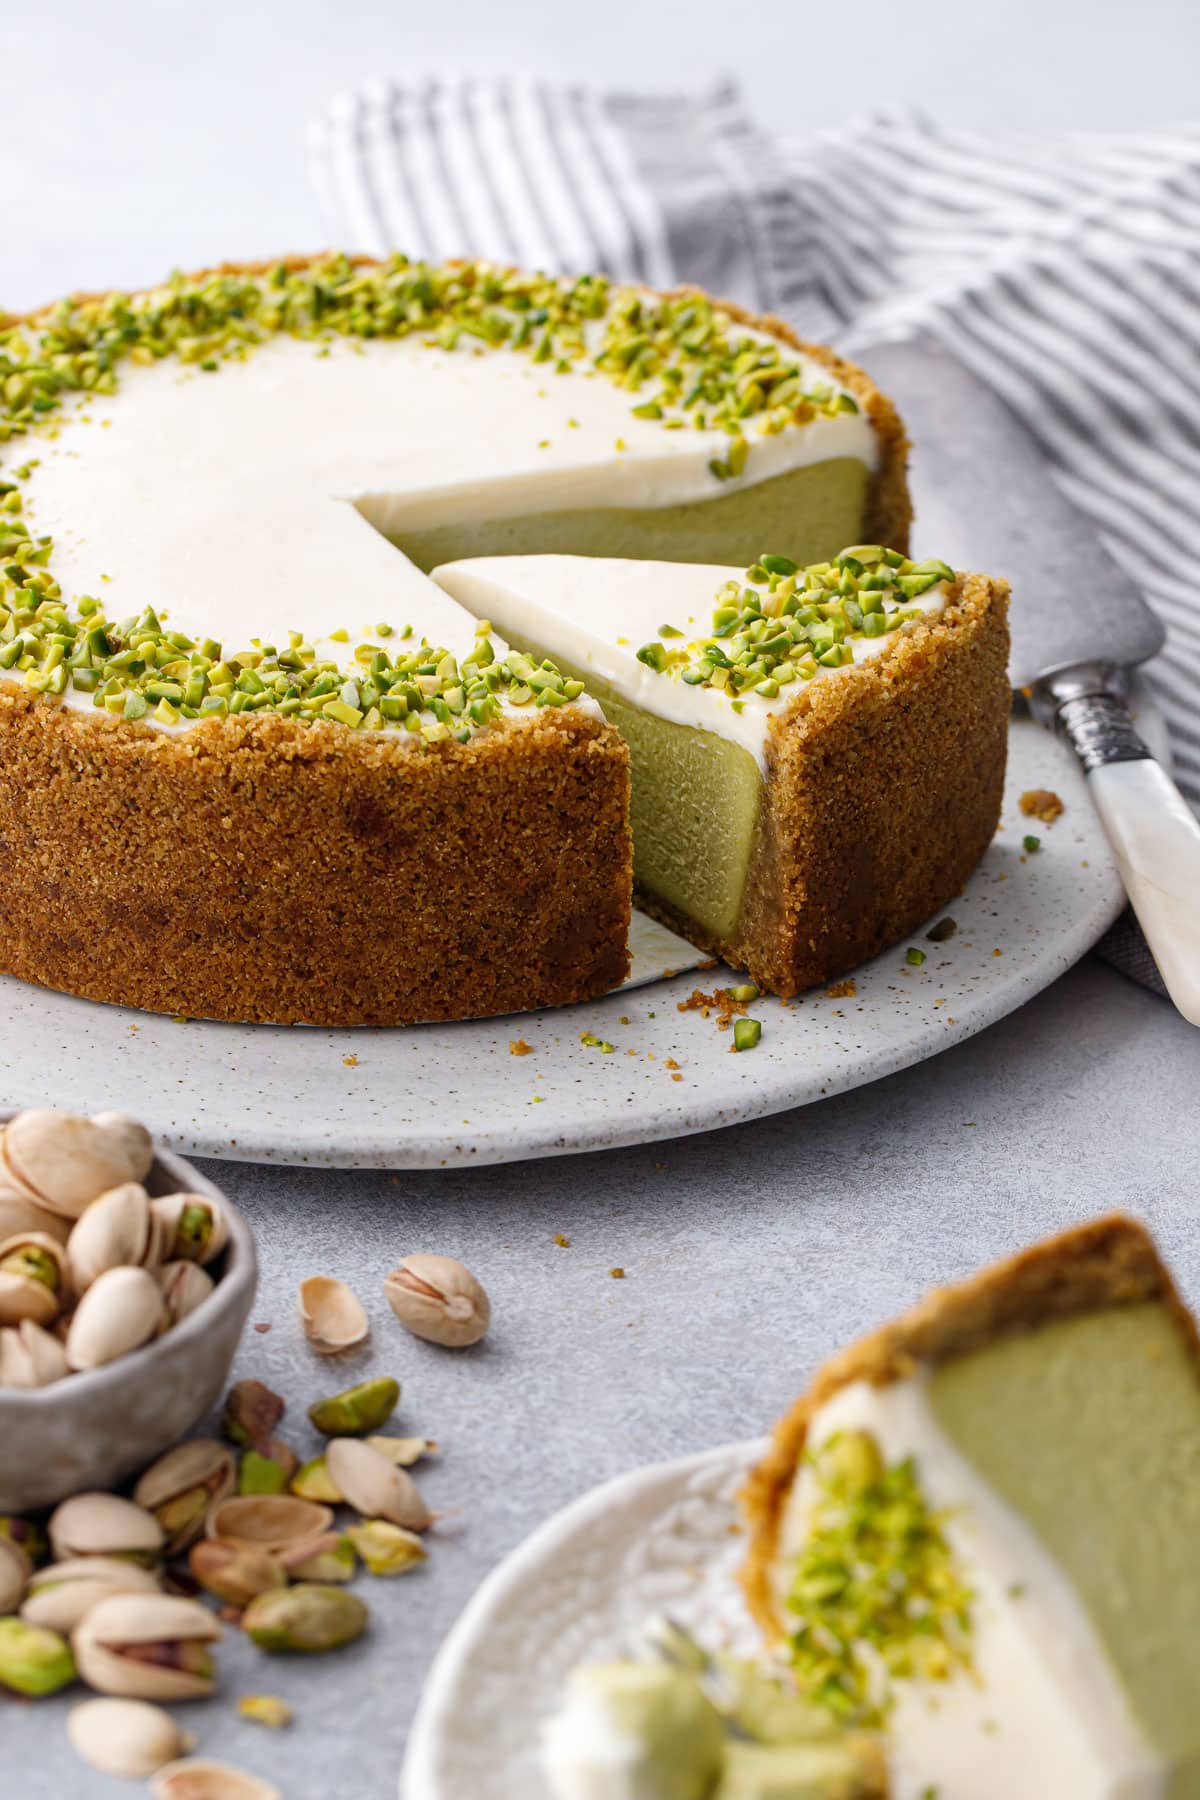 Slice out of a full Pistachio Sour Cream Cheesecake, with out of focus bowl of pistachios and cheesecake slice in the foreground.